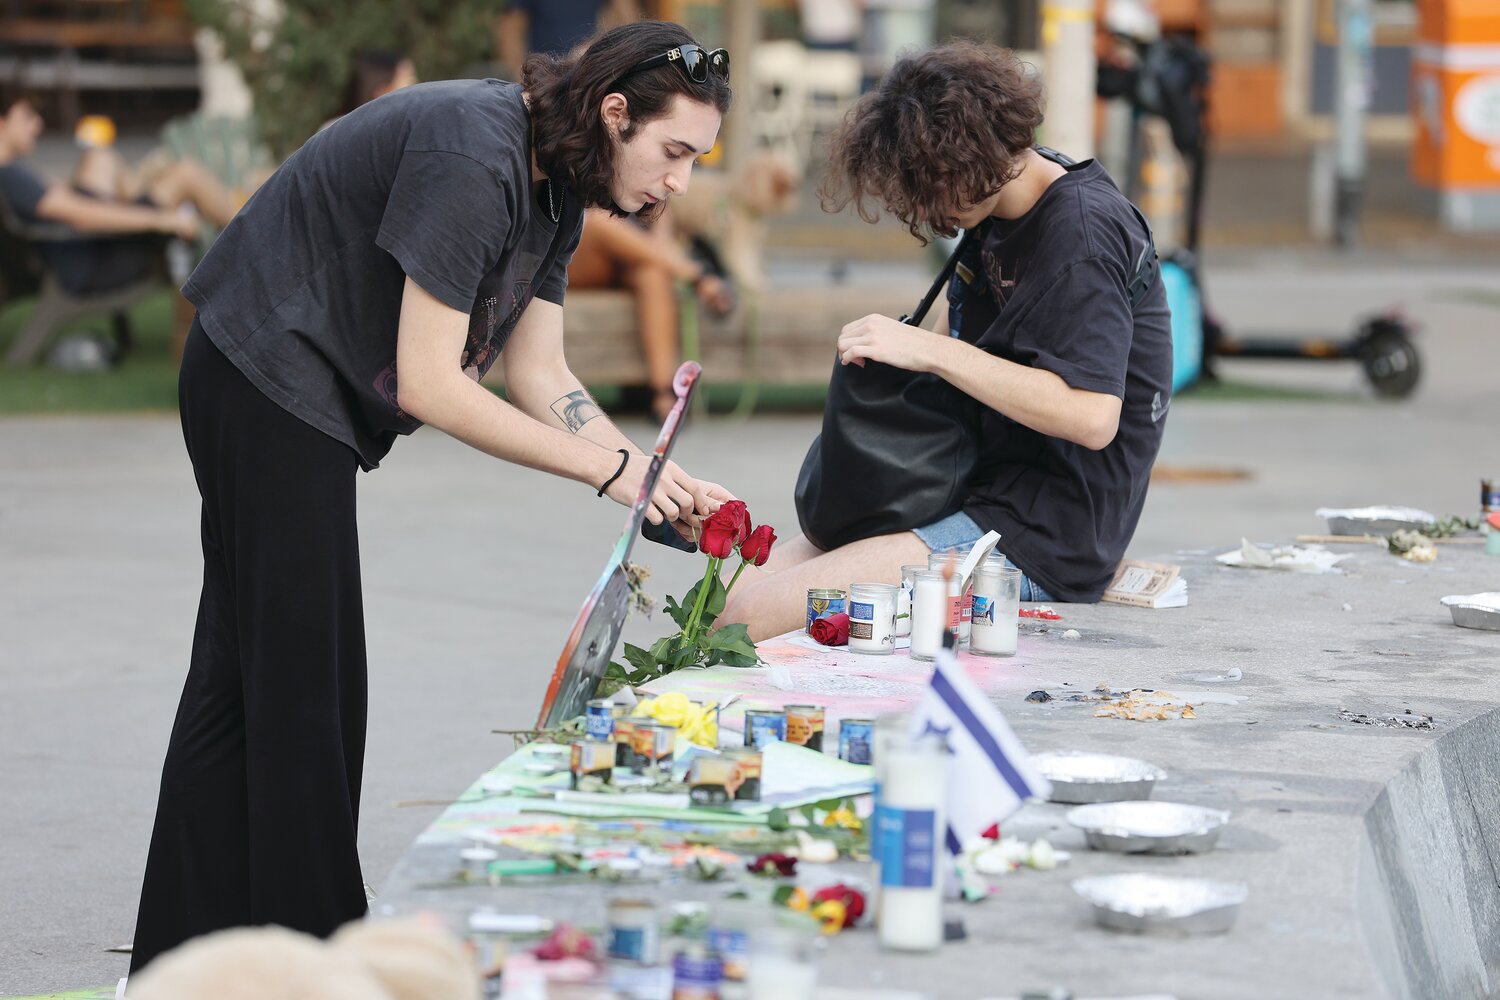 Israelis visit memorials created at Tel Aviv’s Dizengoff Square to remember the 240 in captivity, including 30 children, as well as the 1,200 killed in the Oct. 7 terror attacks.